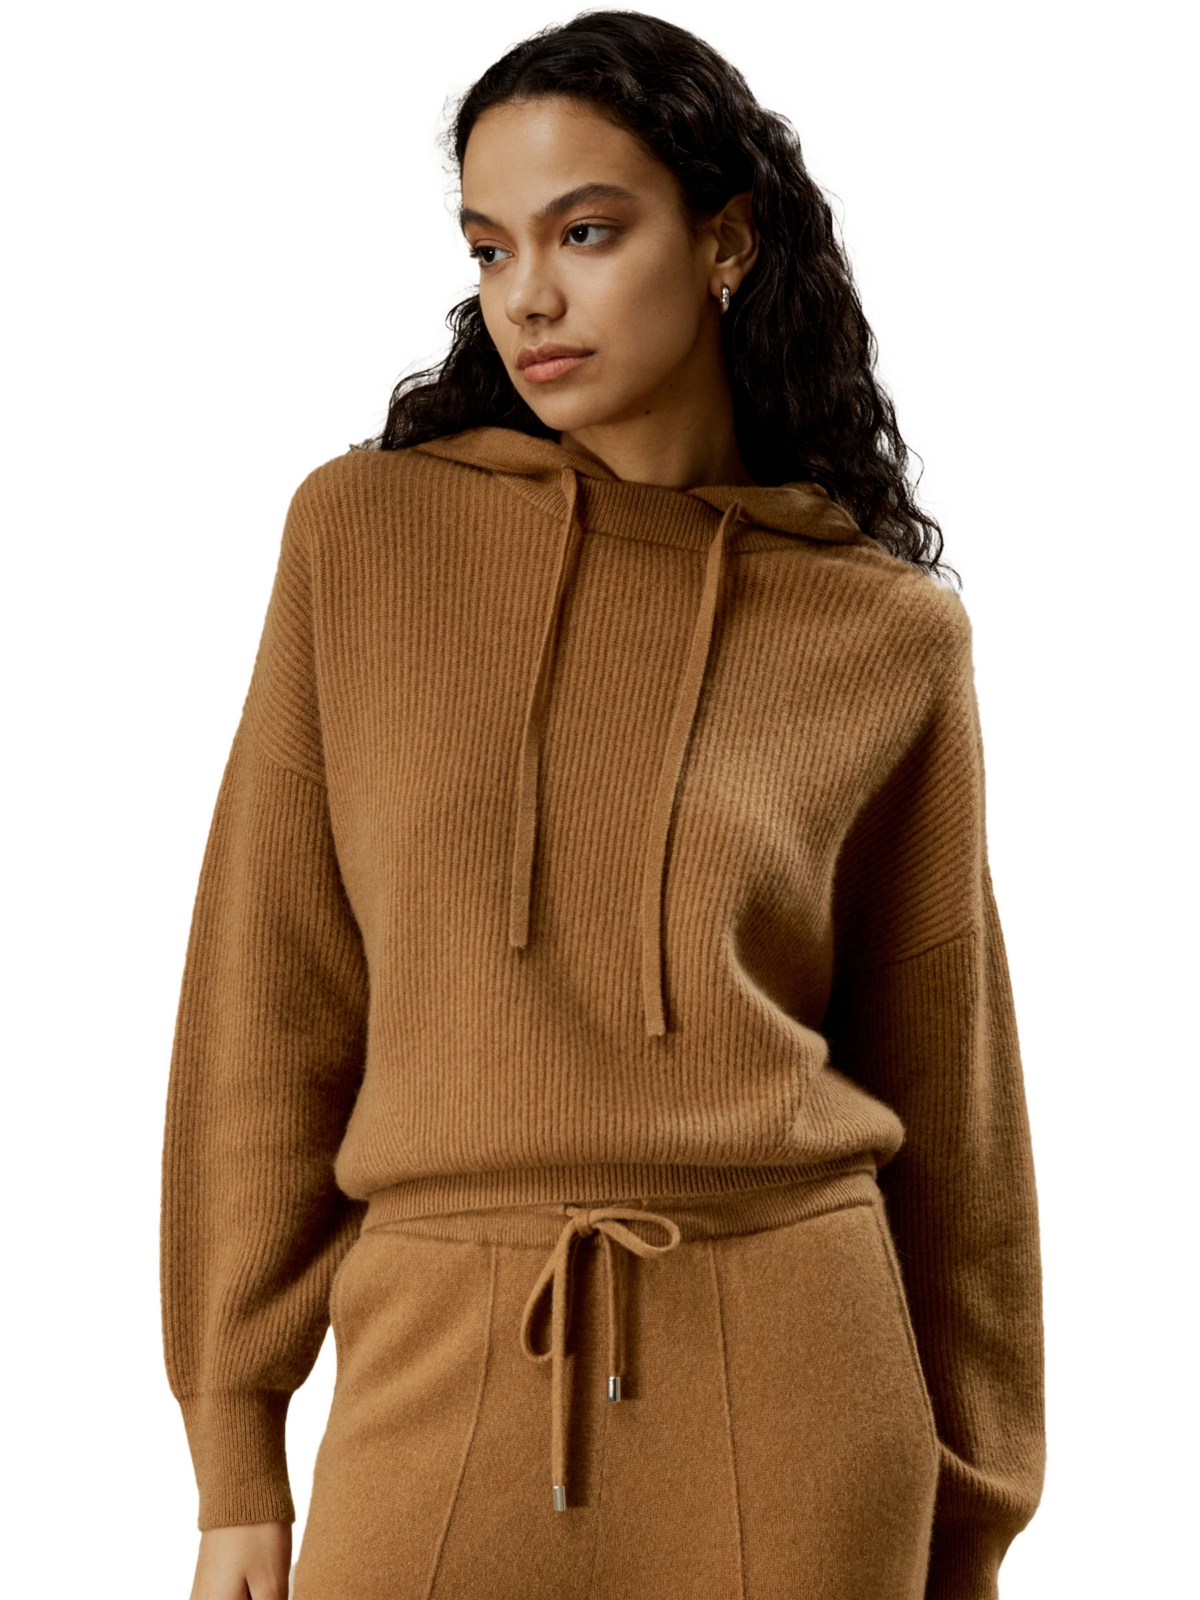 Women's 100% Cashmere Detachable Hoodie for Women - Toffee